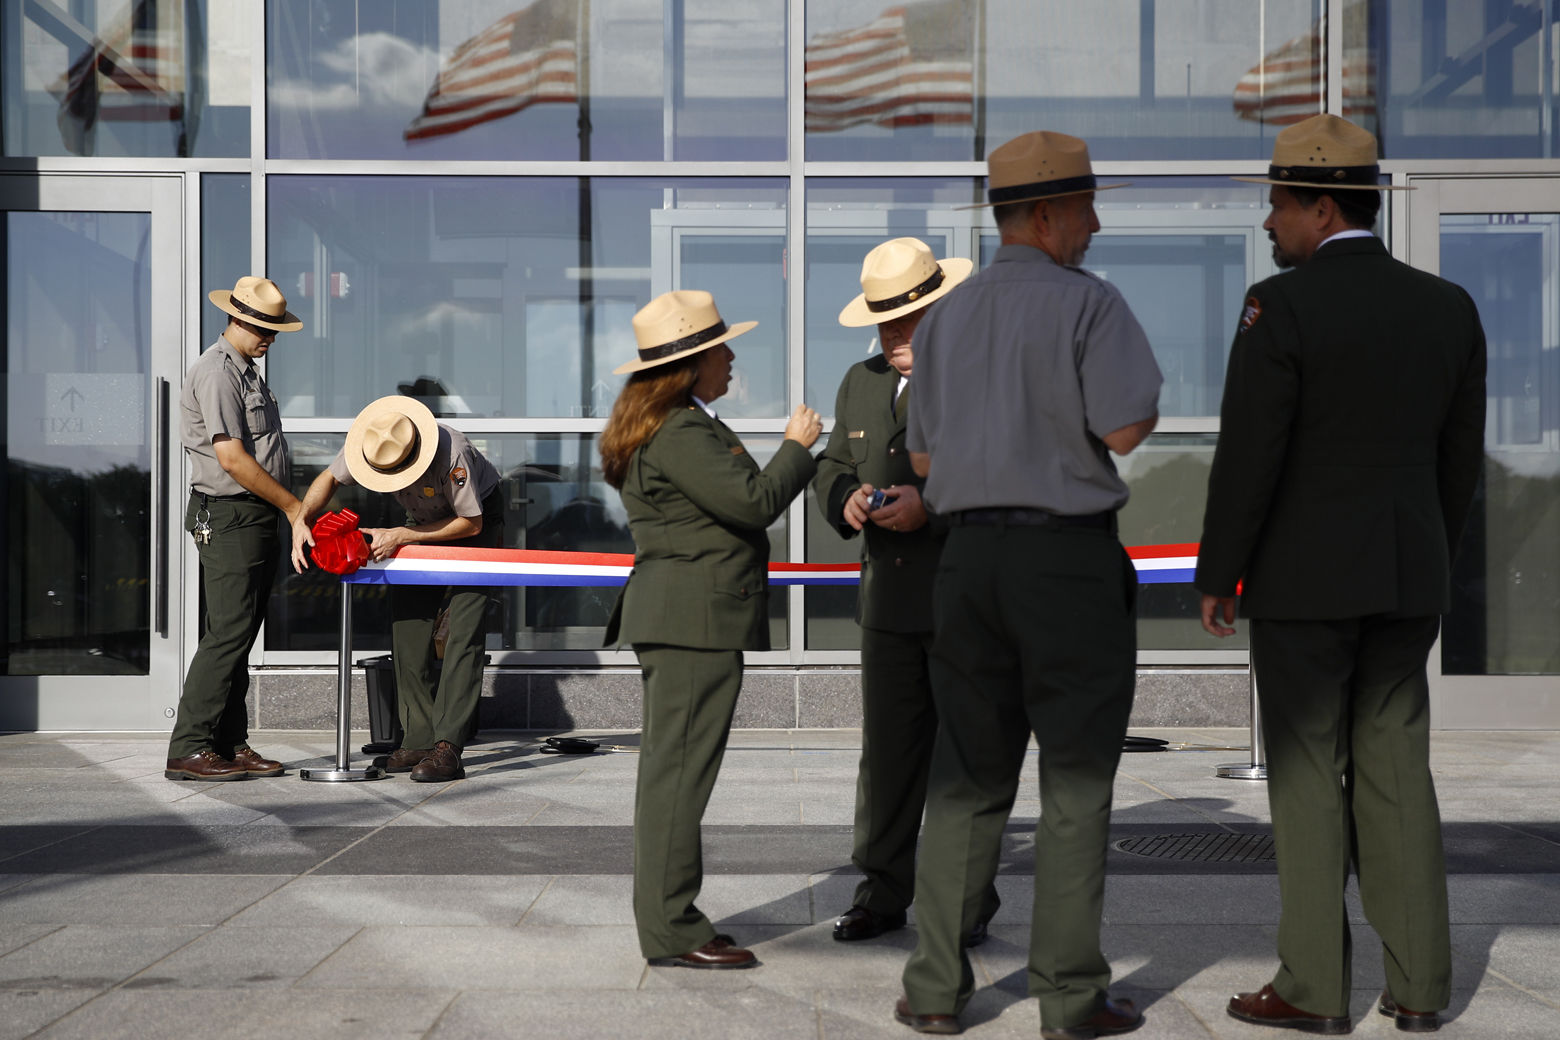 National Park Service rangers prepare a ribbon for a ribbon-cutting ceremony with first lady Melania Trump to re-open the Washington Monument, Thursday, Sept. 19, 2019, in Washington. The monument has been closed to the public for renovations since August 2016. (AP Photo/Patrick Semansky)